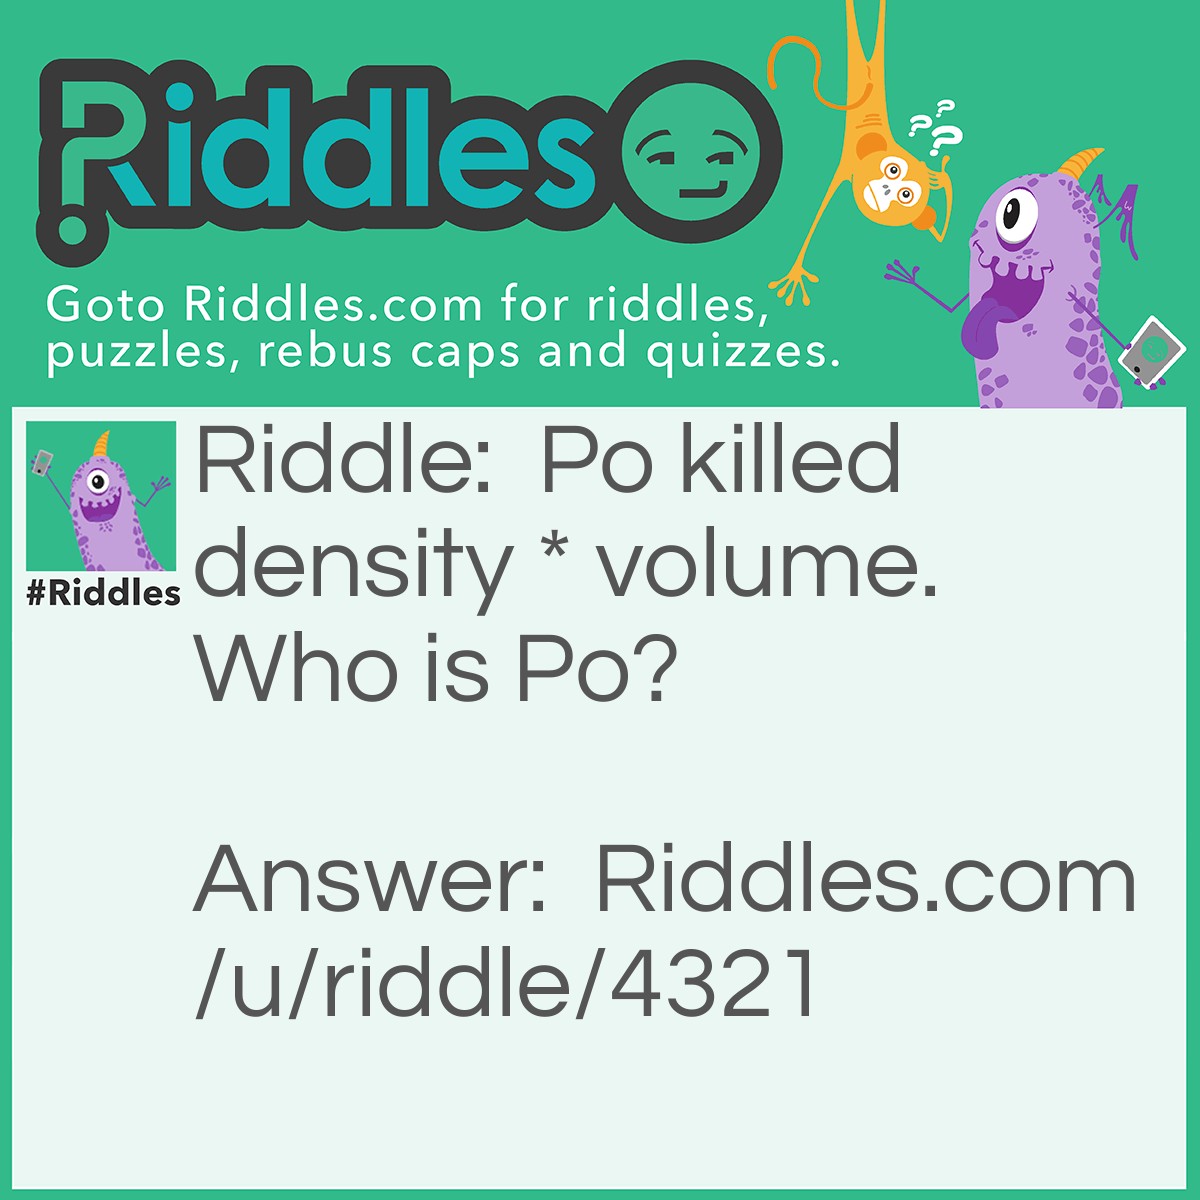 Riddle: Po killed density * volume. Who is Po? Answer: Po was mass murderer. Density * volume equals mass. Therefore, Po killing mass would mean he was a mass murderer.